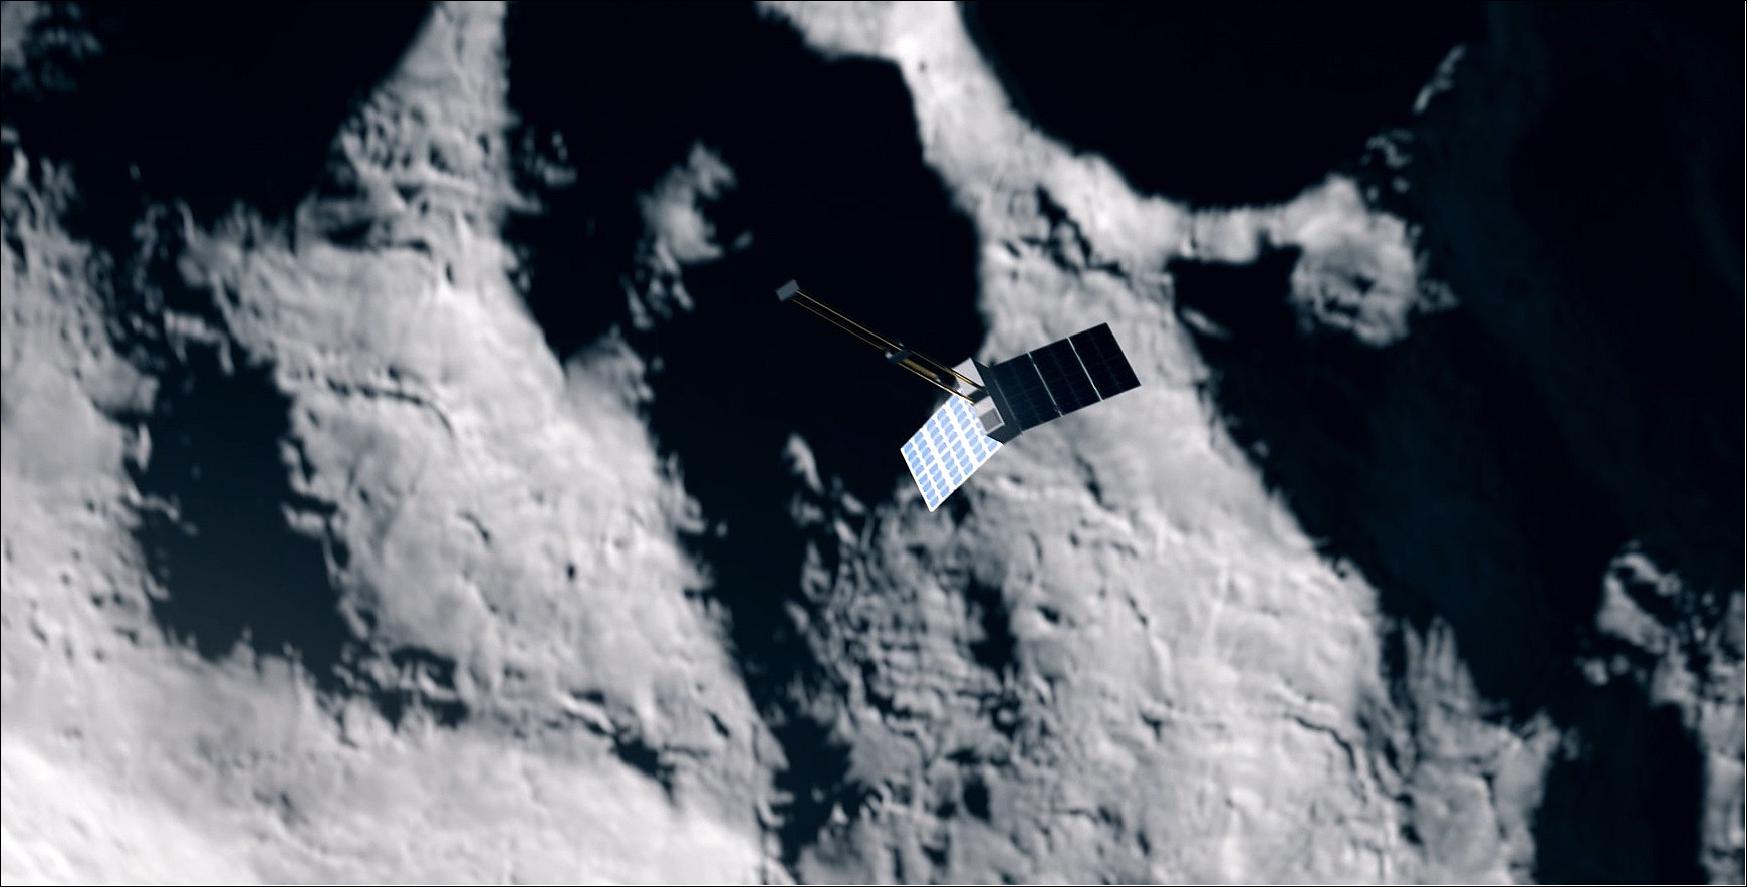 Figure 40: APEX CubeSat above Didymoon. The APEX CubeSat over the smaller of the two Didymos asteroids. ESA’s Hera mission for planetary defence, being designed to survey the smallest asteroid ever explored, is really three spacecraft in one. The main mothership will carry two briefcase-sized CubeSats, which will touch down on the target body. The APEX CubeSat will perform a multispectral mineral survey of the asteroid's makeup (image credit: ESA – Science Office)